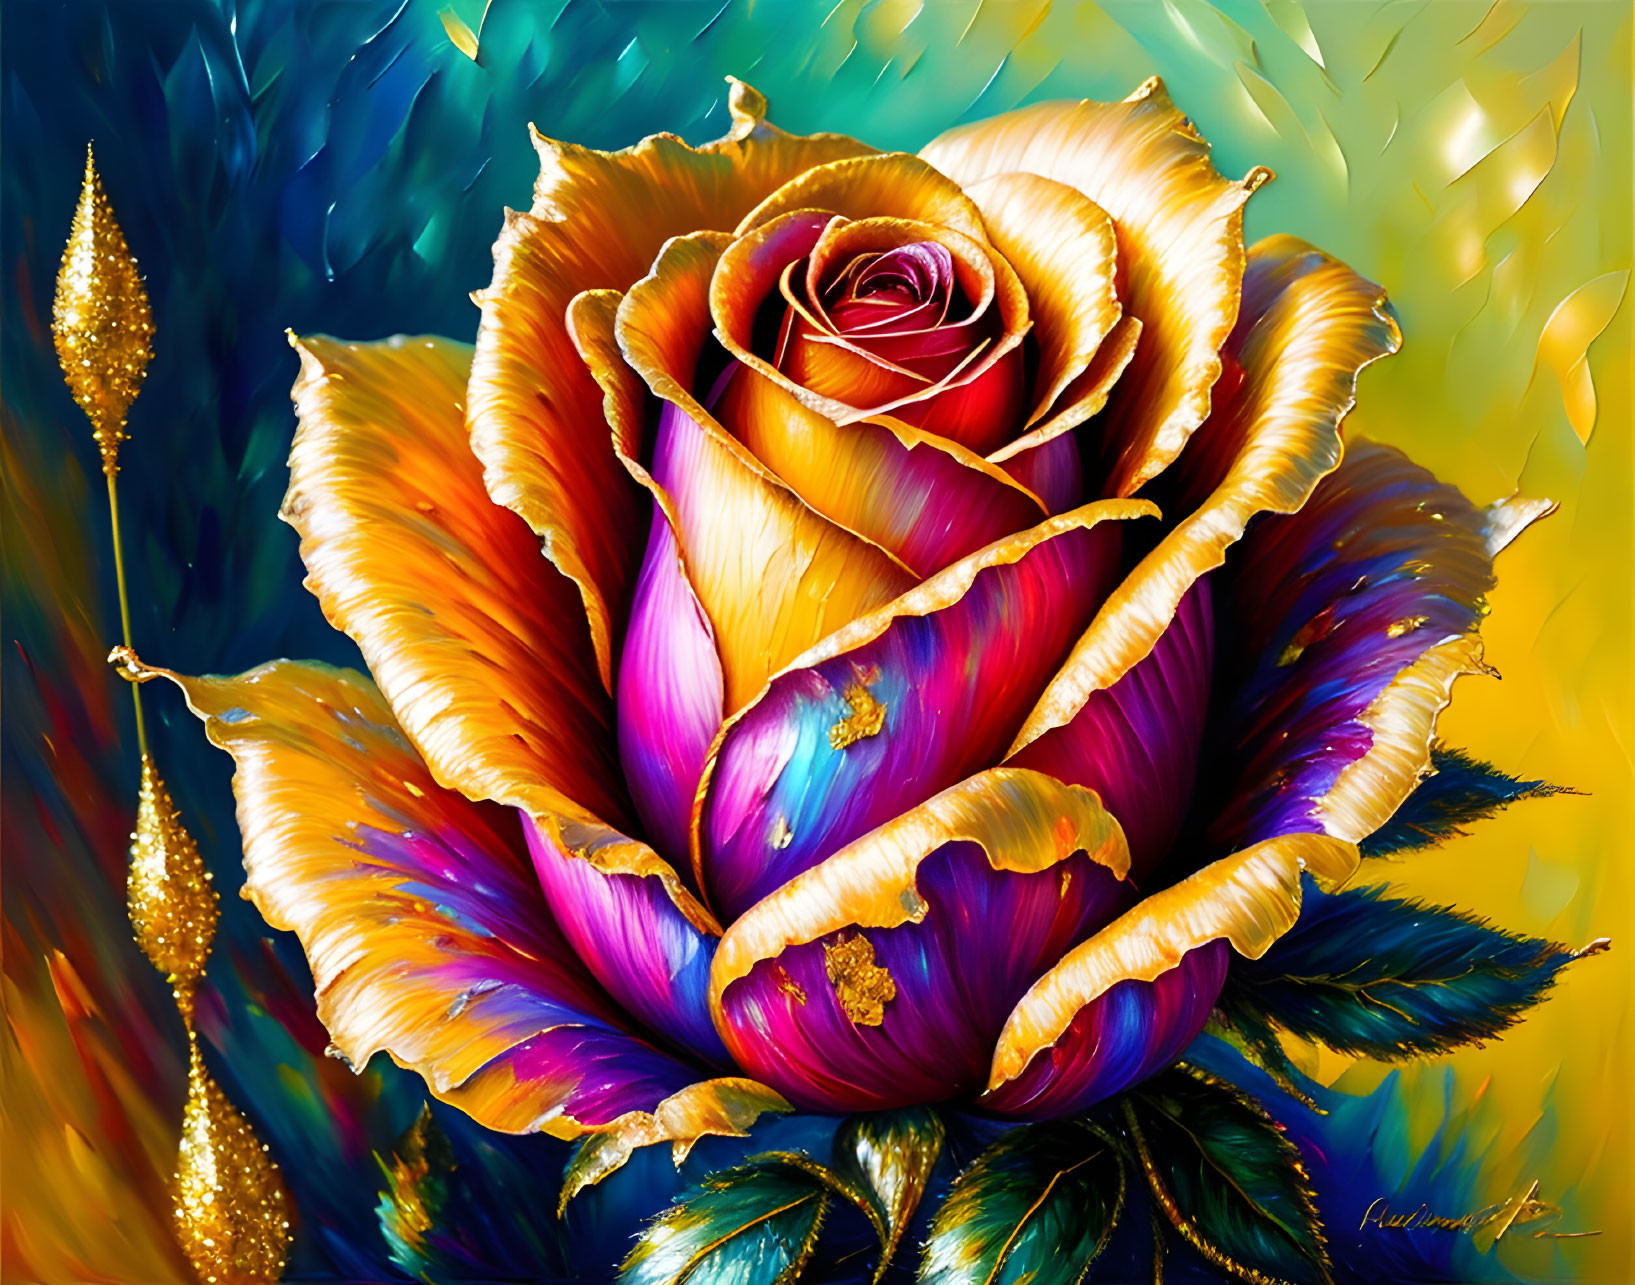 Colorful digital painting of a rose with gold-trimmed petals on abstract background